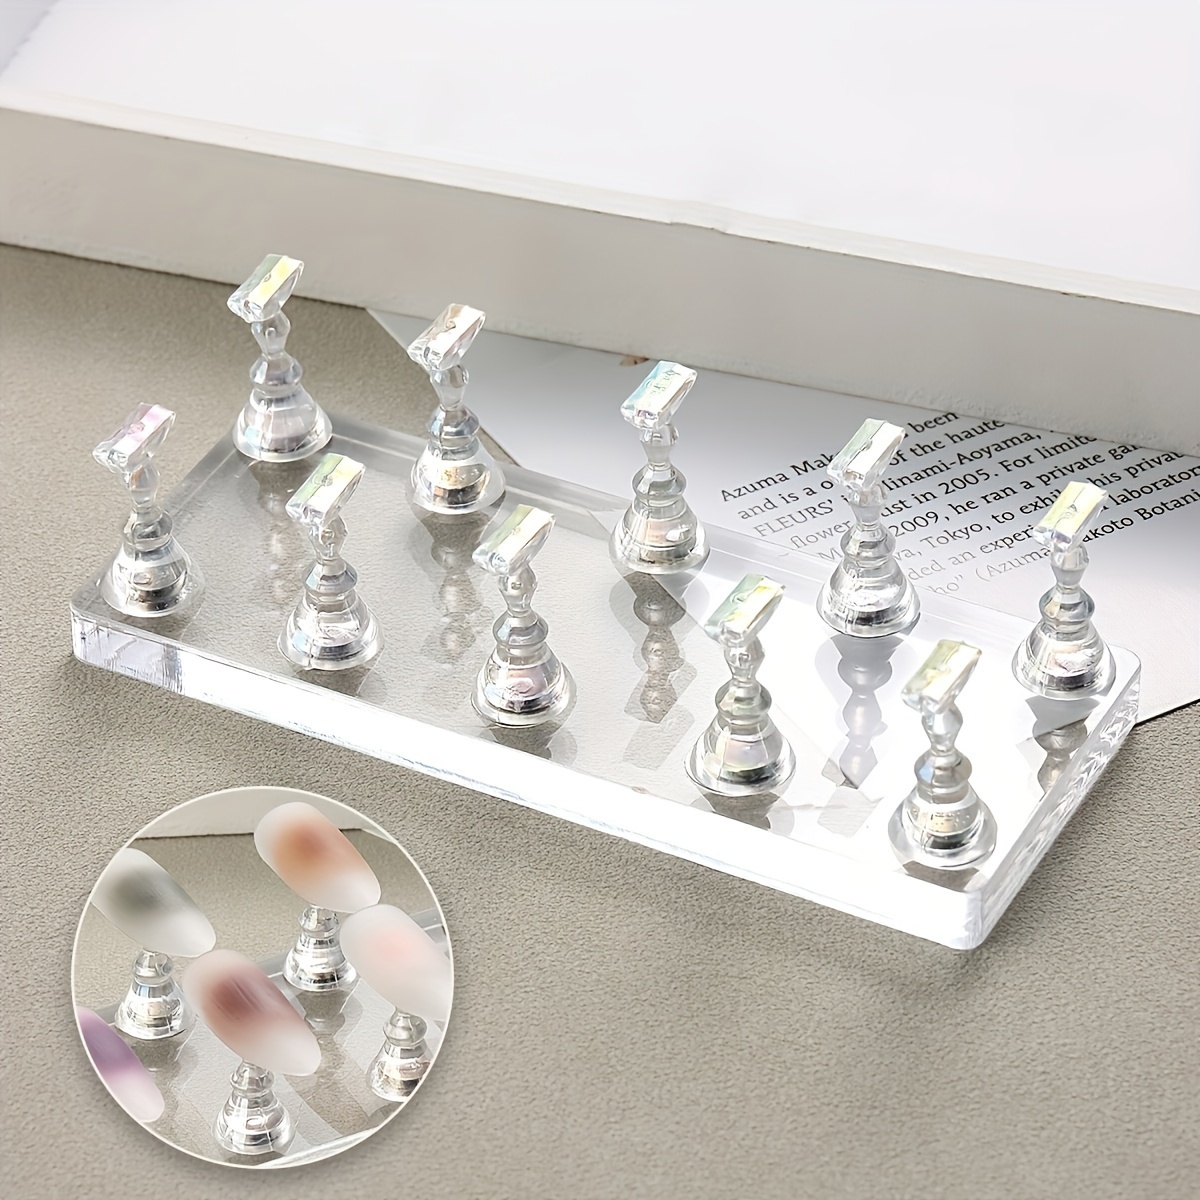 

Acrylic Chess Piece Model Nail Practice Stand, Clear Nail Display Stand For Training And Display, Durable Manicure Tool Set, Salon And Home Use